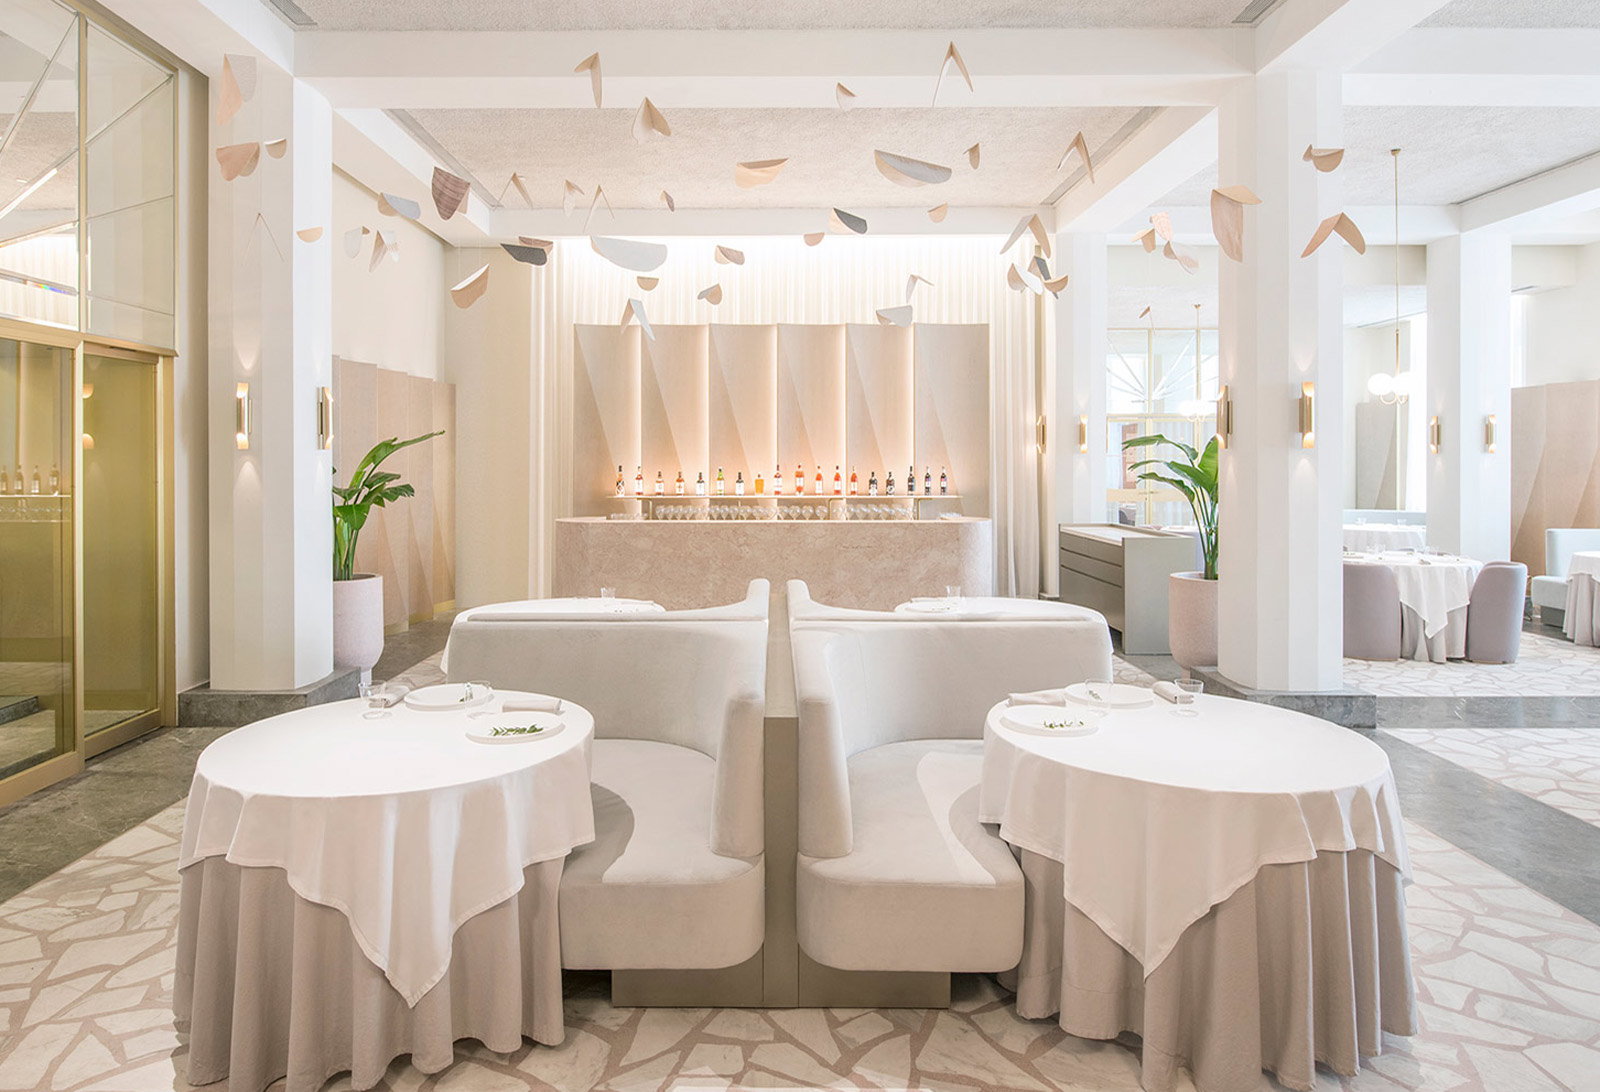 Interior dining room at Odette, one of Singapore's best restaurants